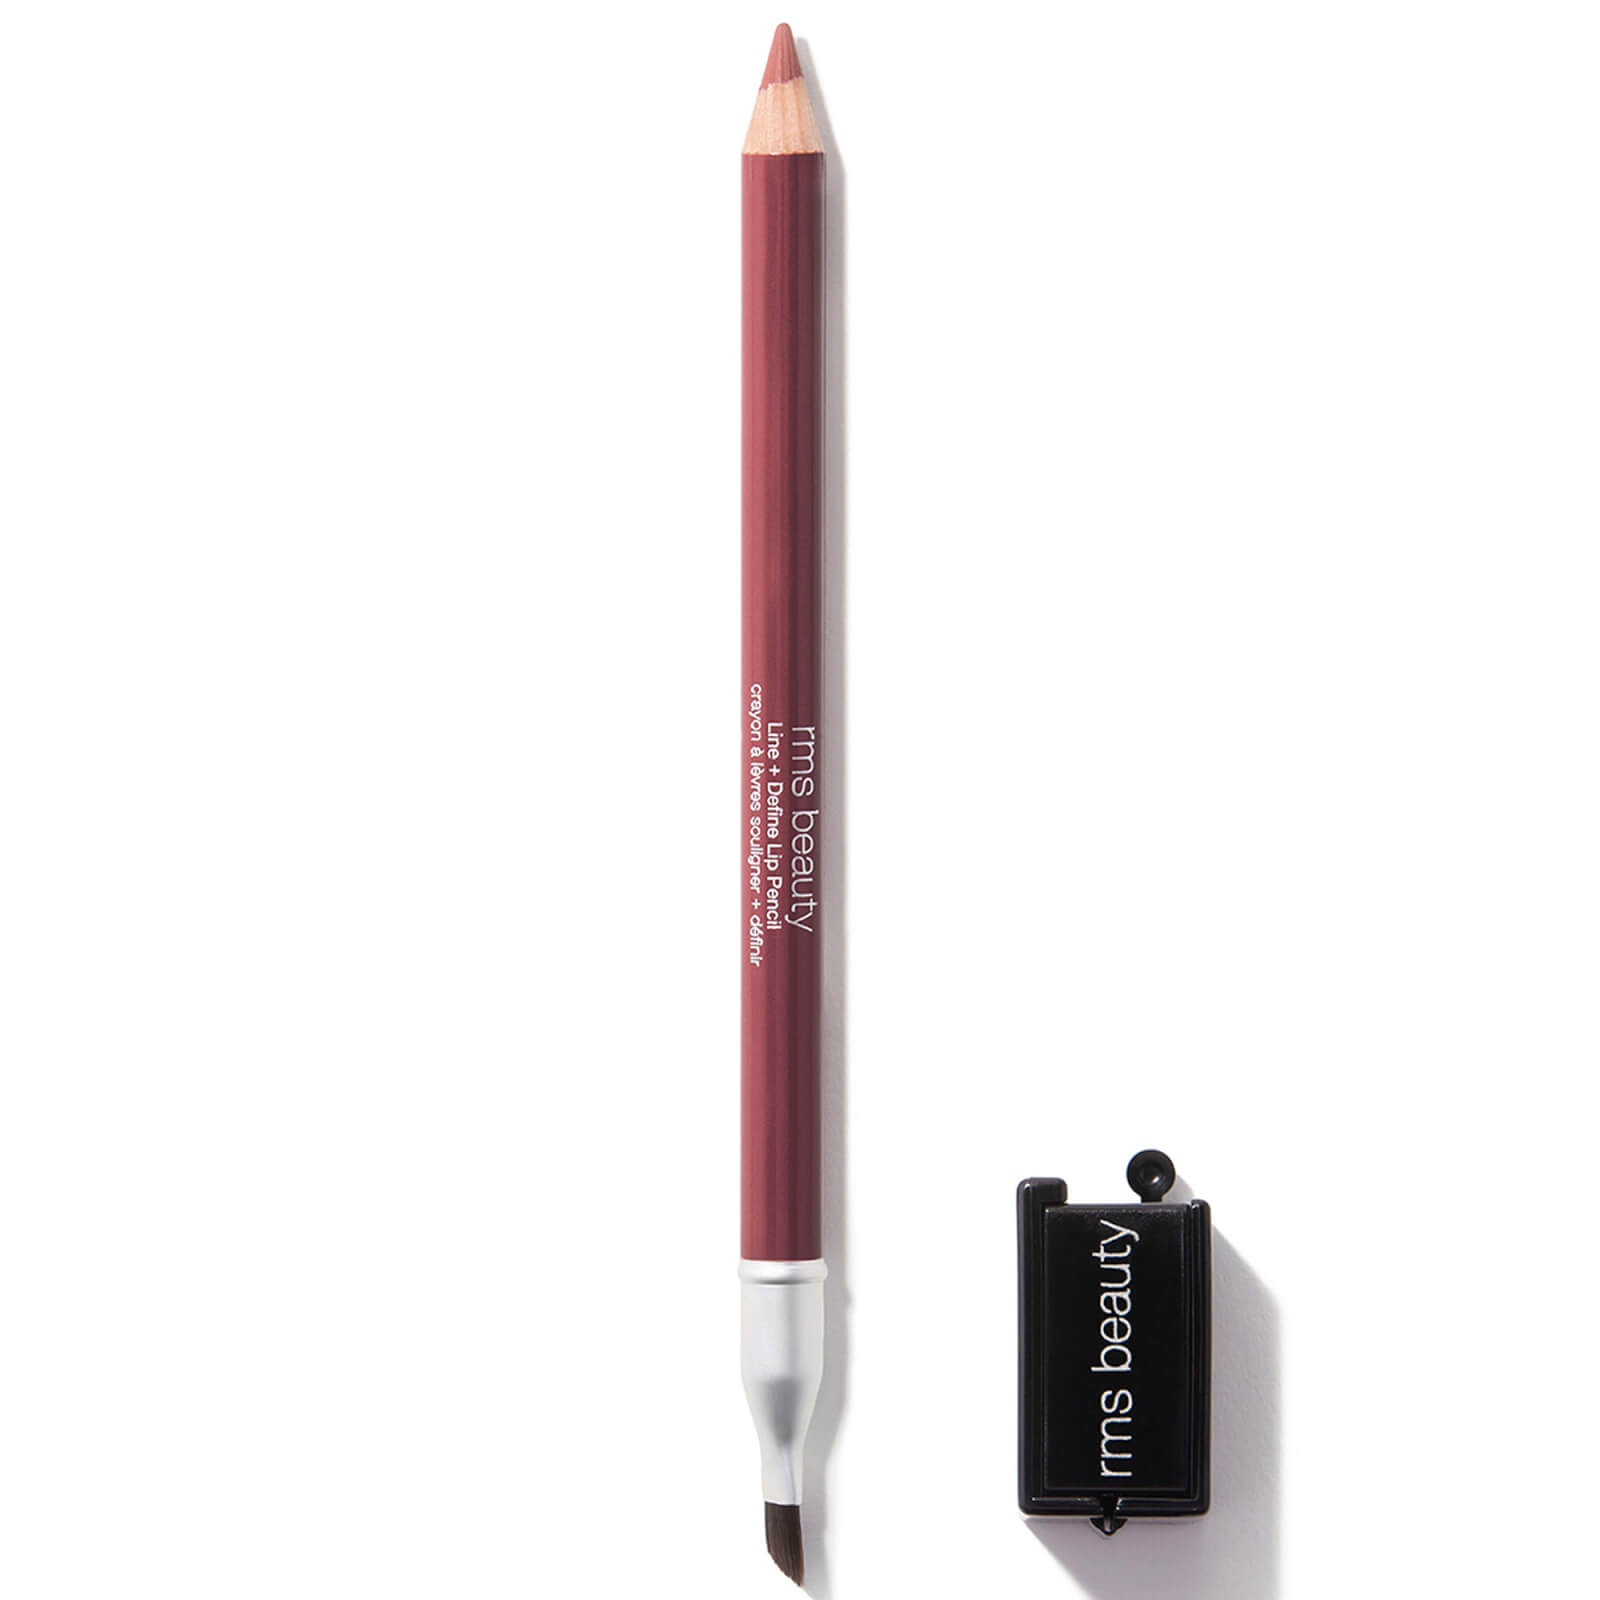 Rms Beauty Go Nude Lip Pencil 1.08g (various Shades) - Sunset Nude